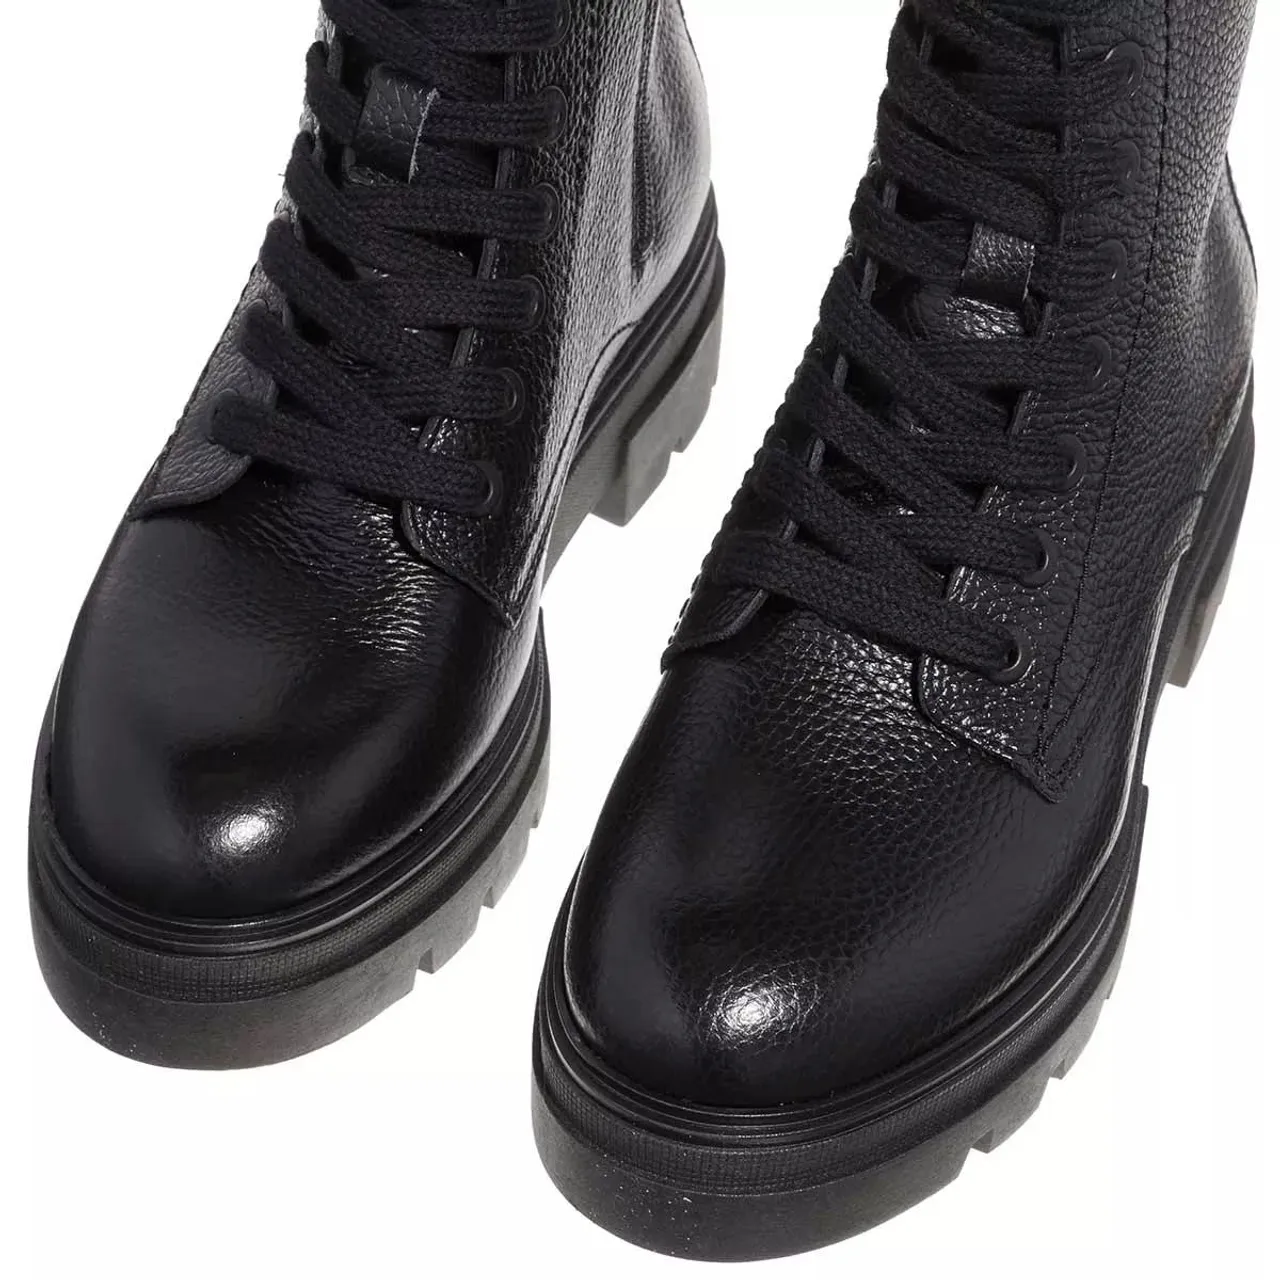 Tommy Hilfiger Boots & Stiefeletten - Monochromatic Lace Up Boot